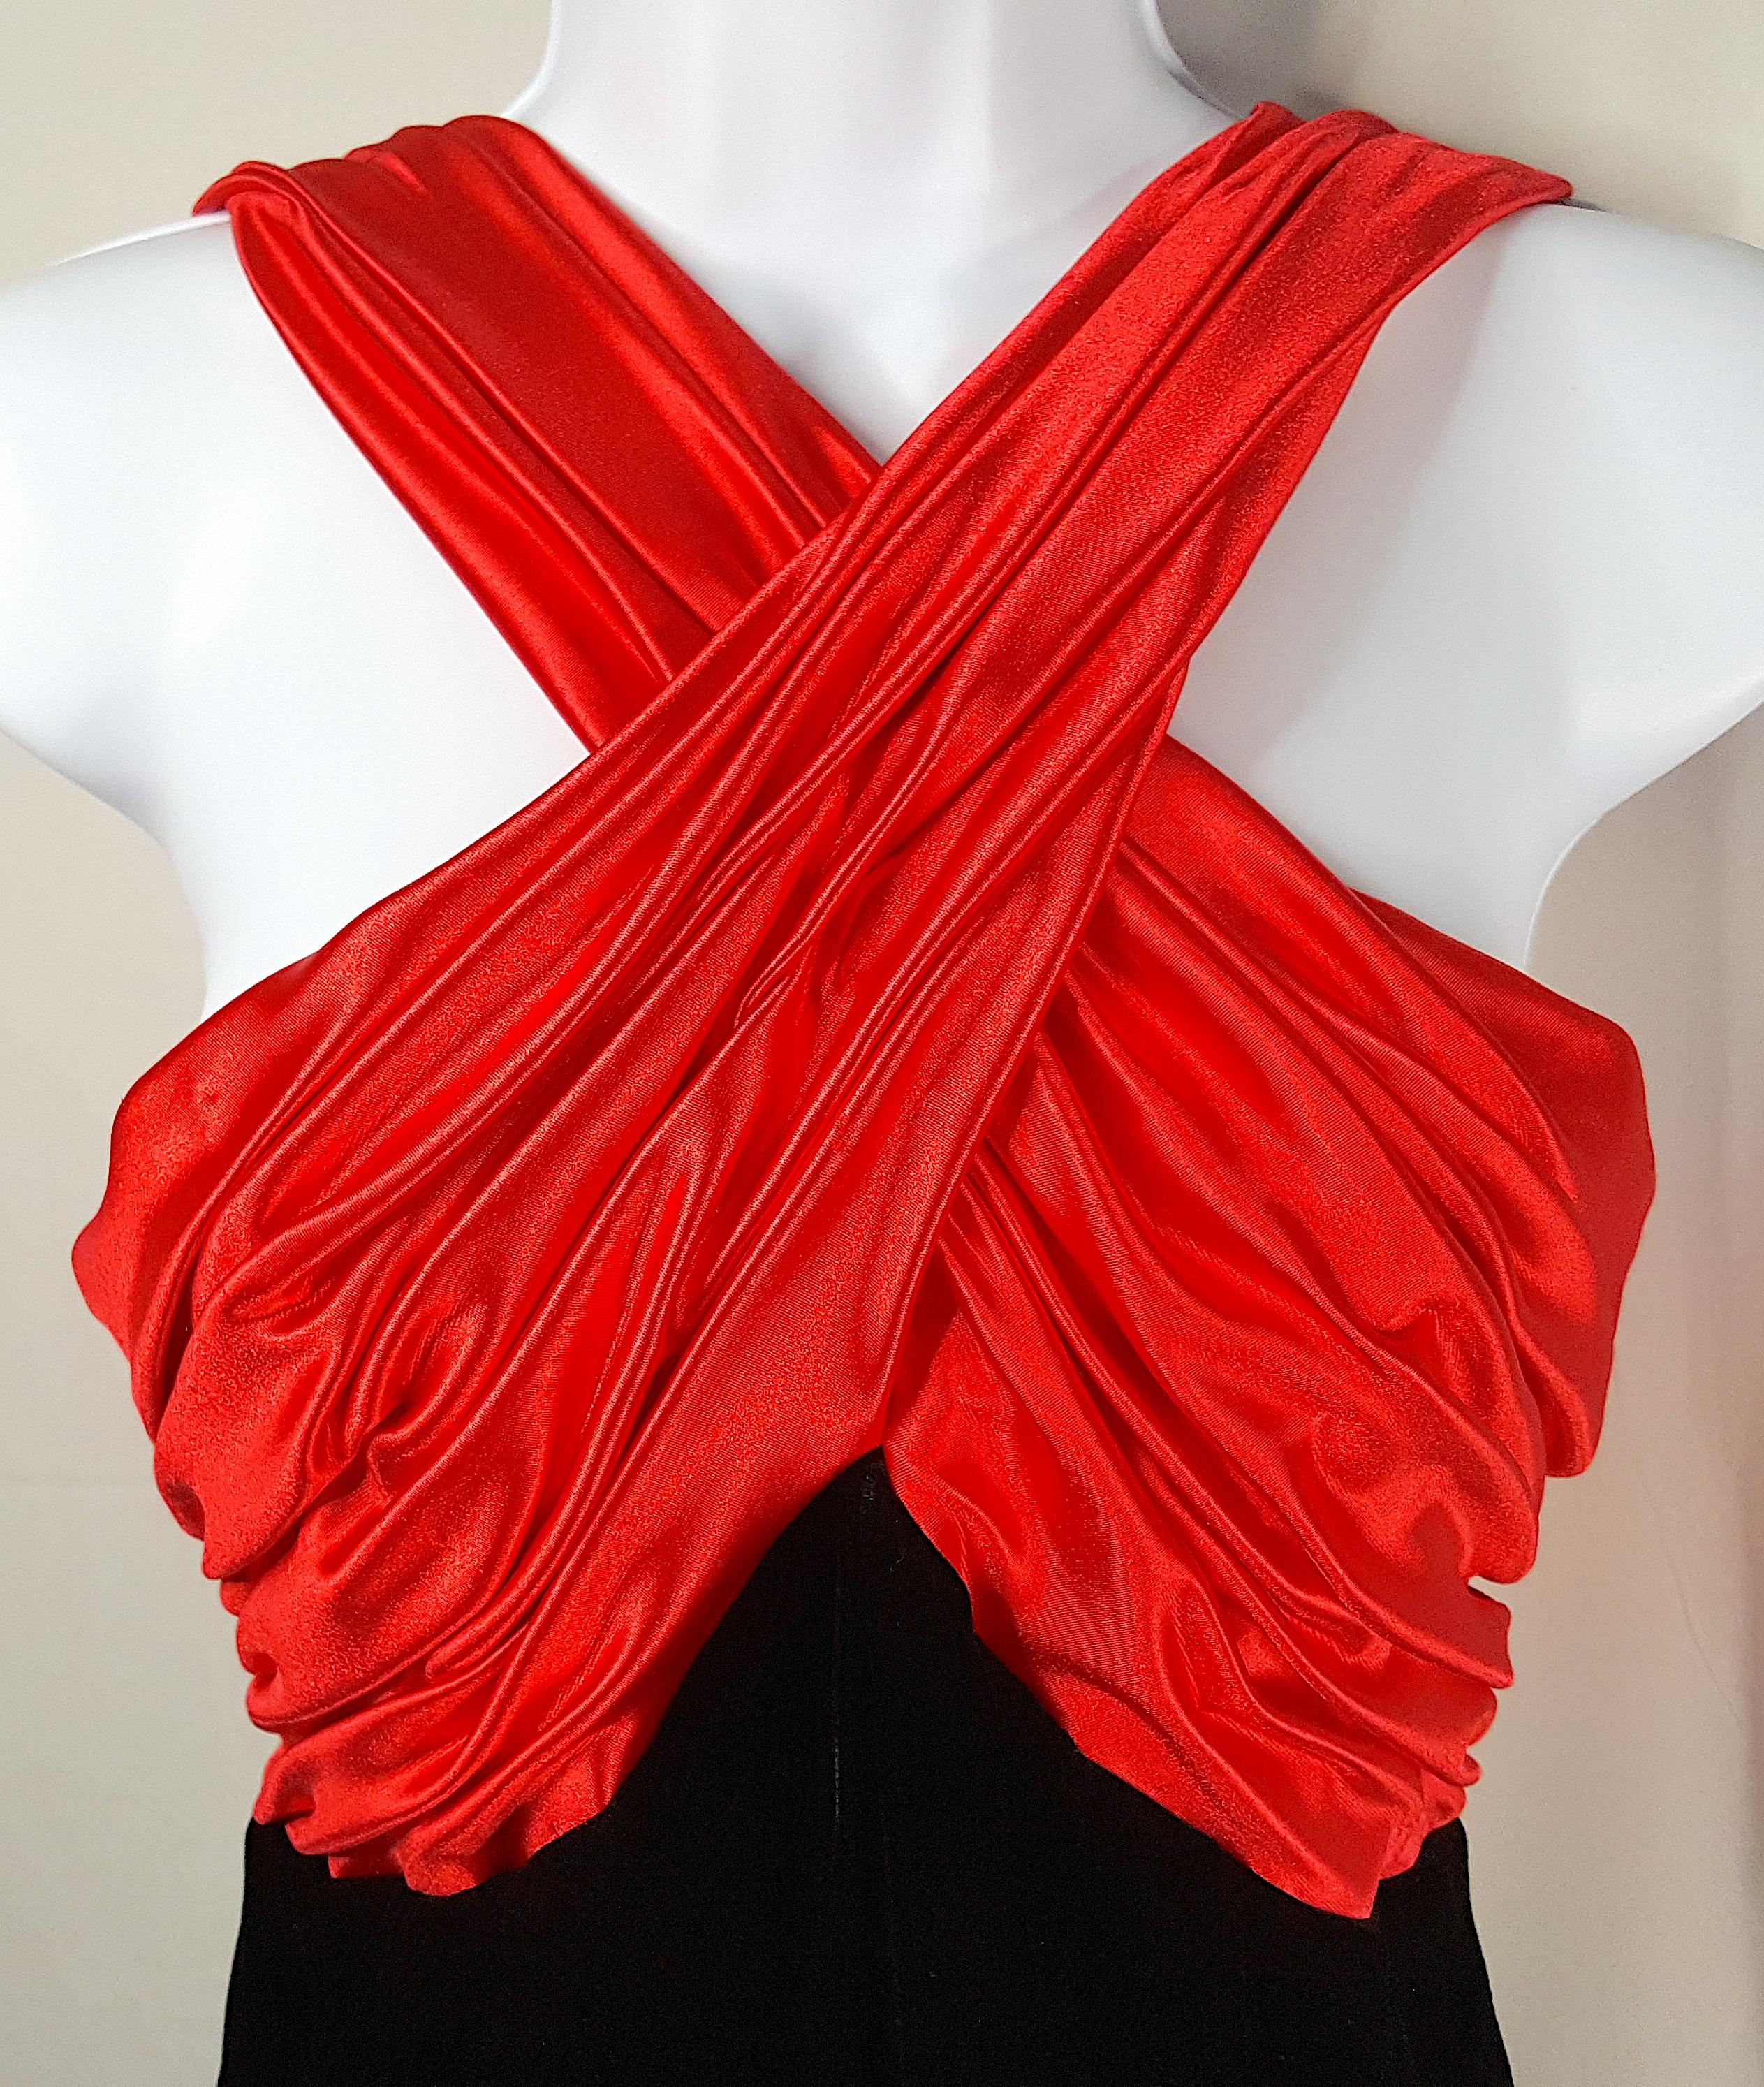 For a formal special event, this 1980s maxi dress sleeveless gown by American designer Victor Costa features glamorous glossy red satin that is gathered, ruched and topstitched in both front and back to create the crossing bands above the peaked and